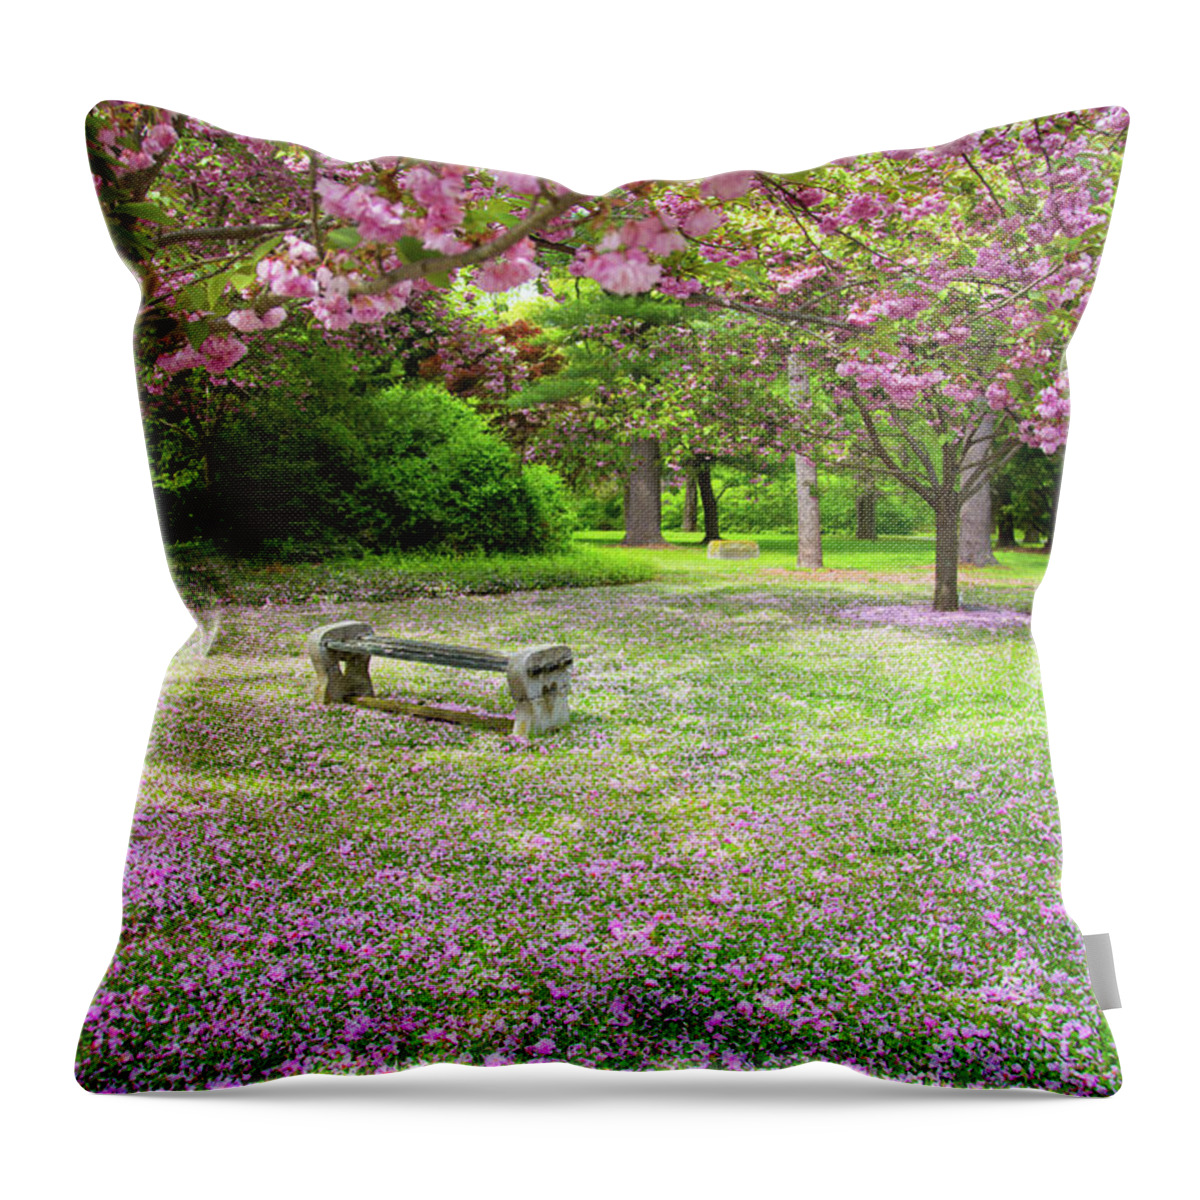 Tranquility Throw Pillow featuring the photograph Garden Bench In Springtime by Littleny Photographic Arts ~ Lisa Combs